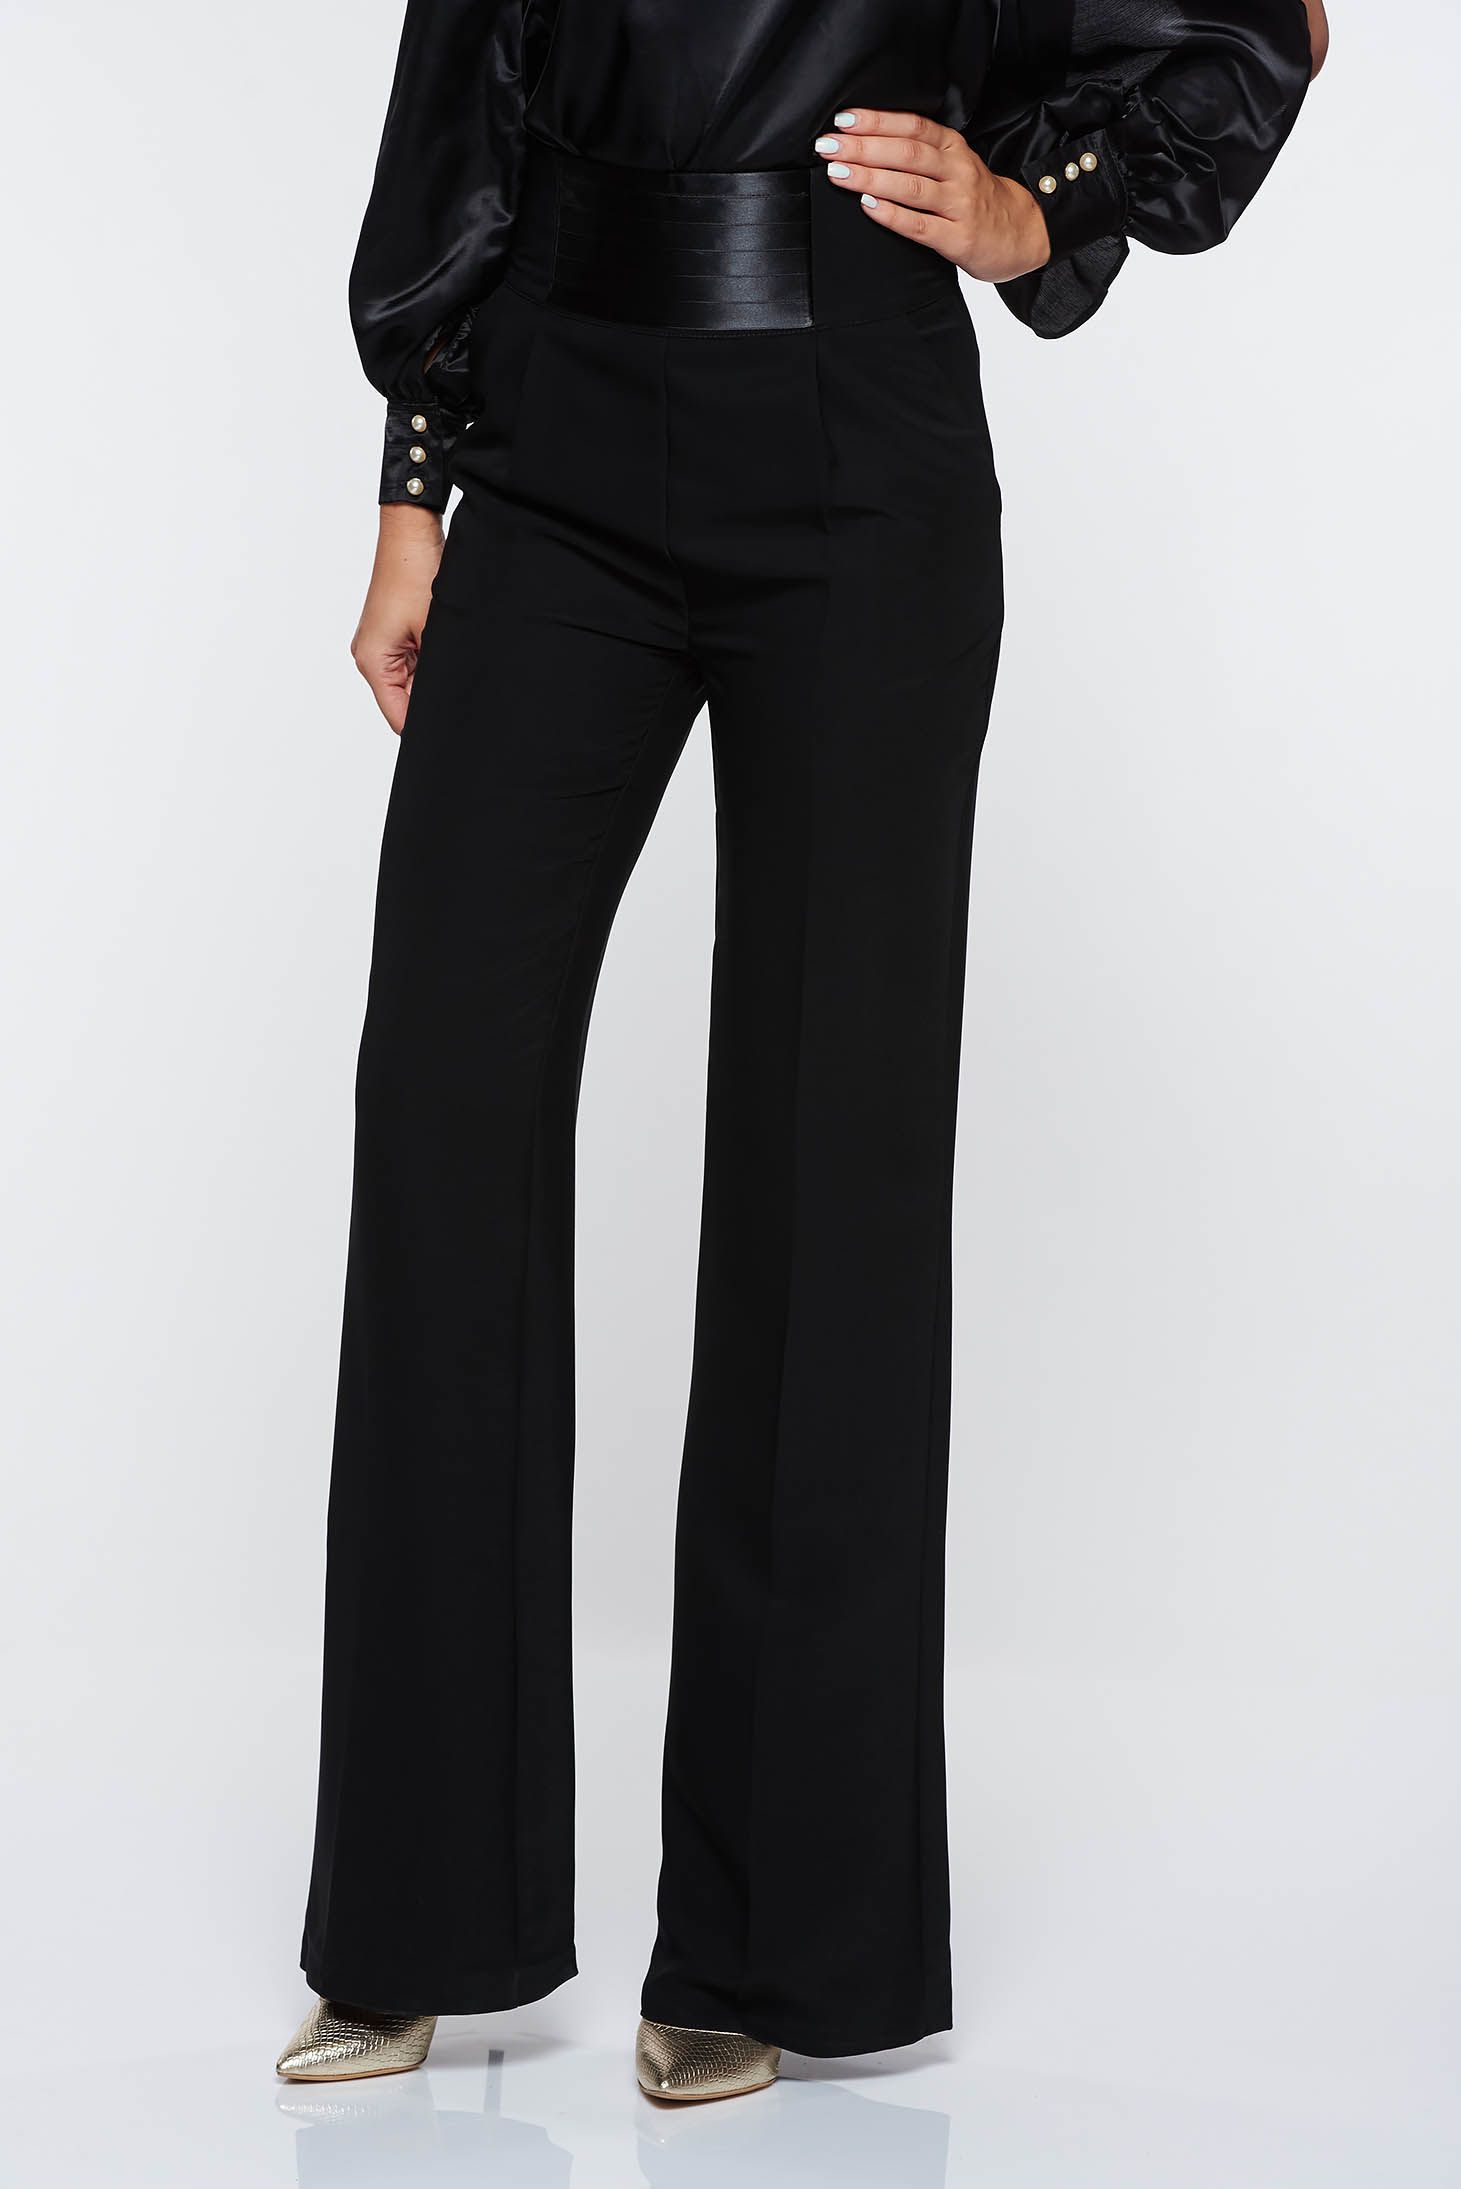 PrettyGirl black trousers elegant high waisted flared with pockets